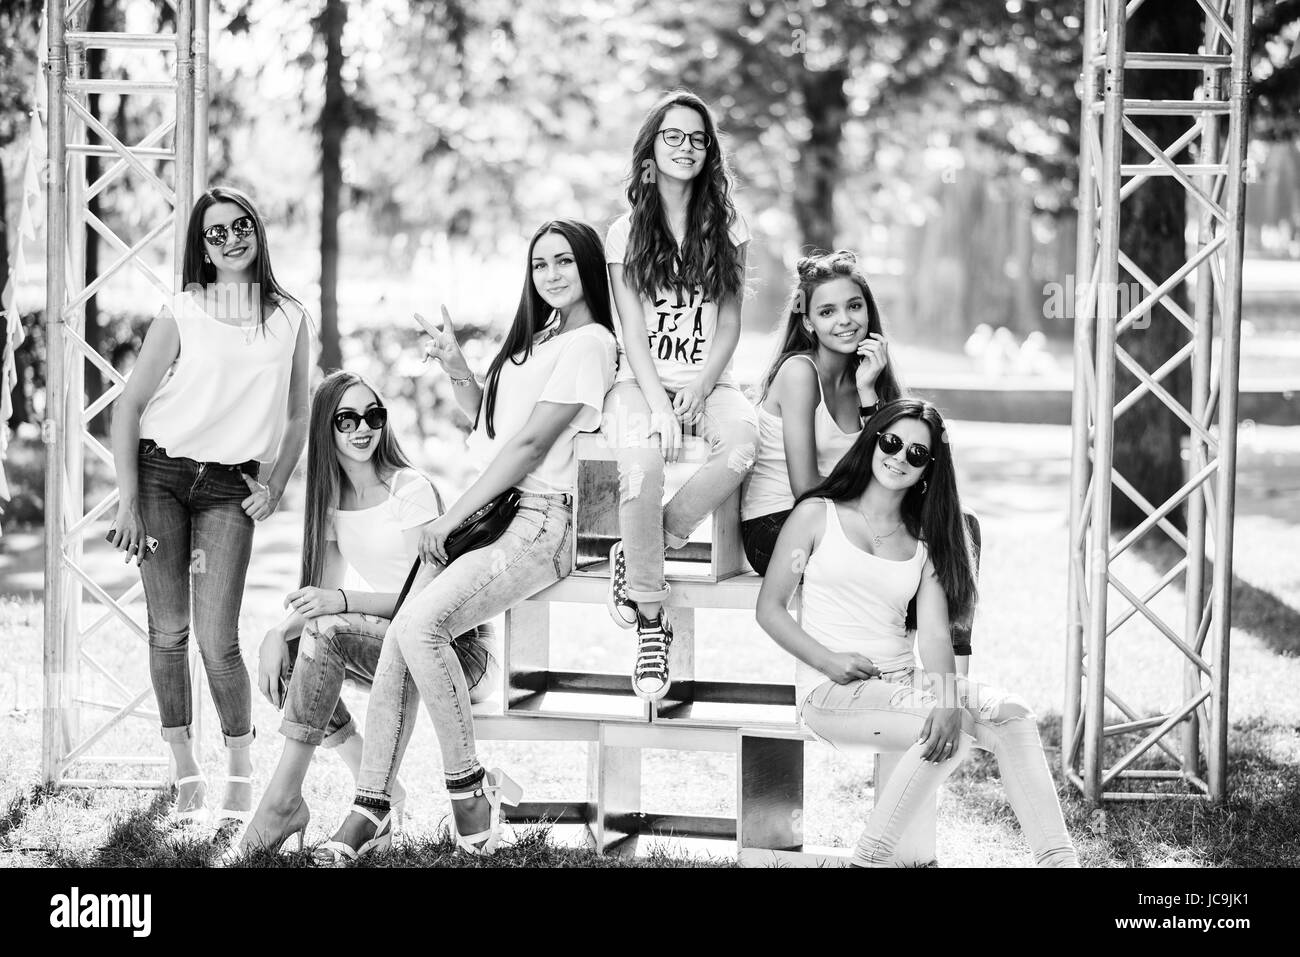 Six wonderful model girls posing on wooden boxes in the park on a sunny day. Black and white photo. Stock Photo